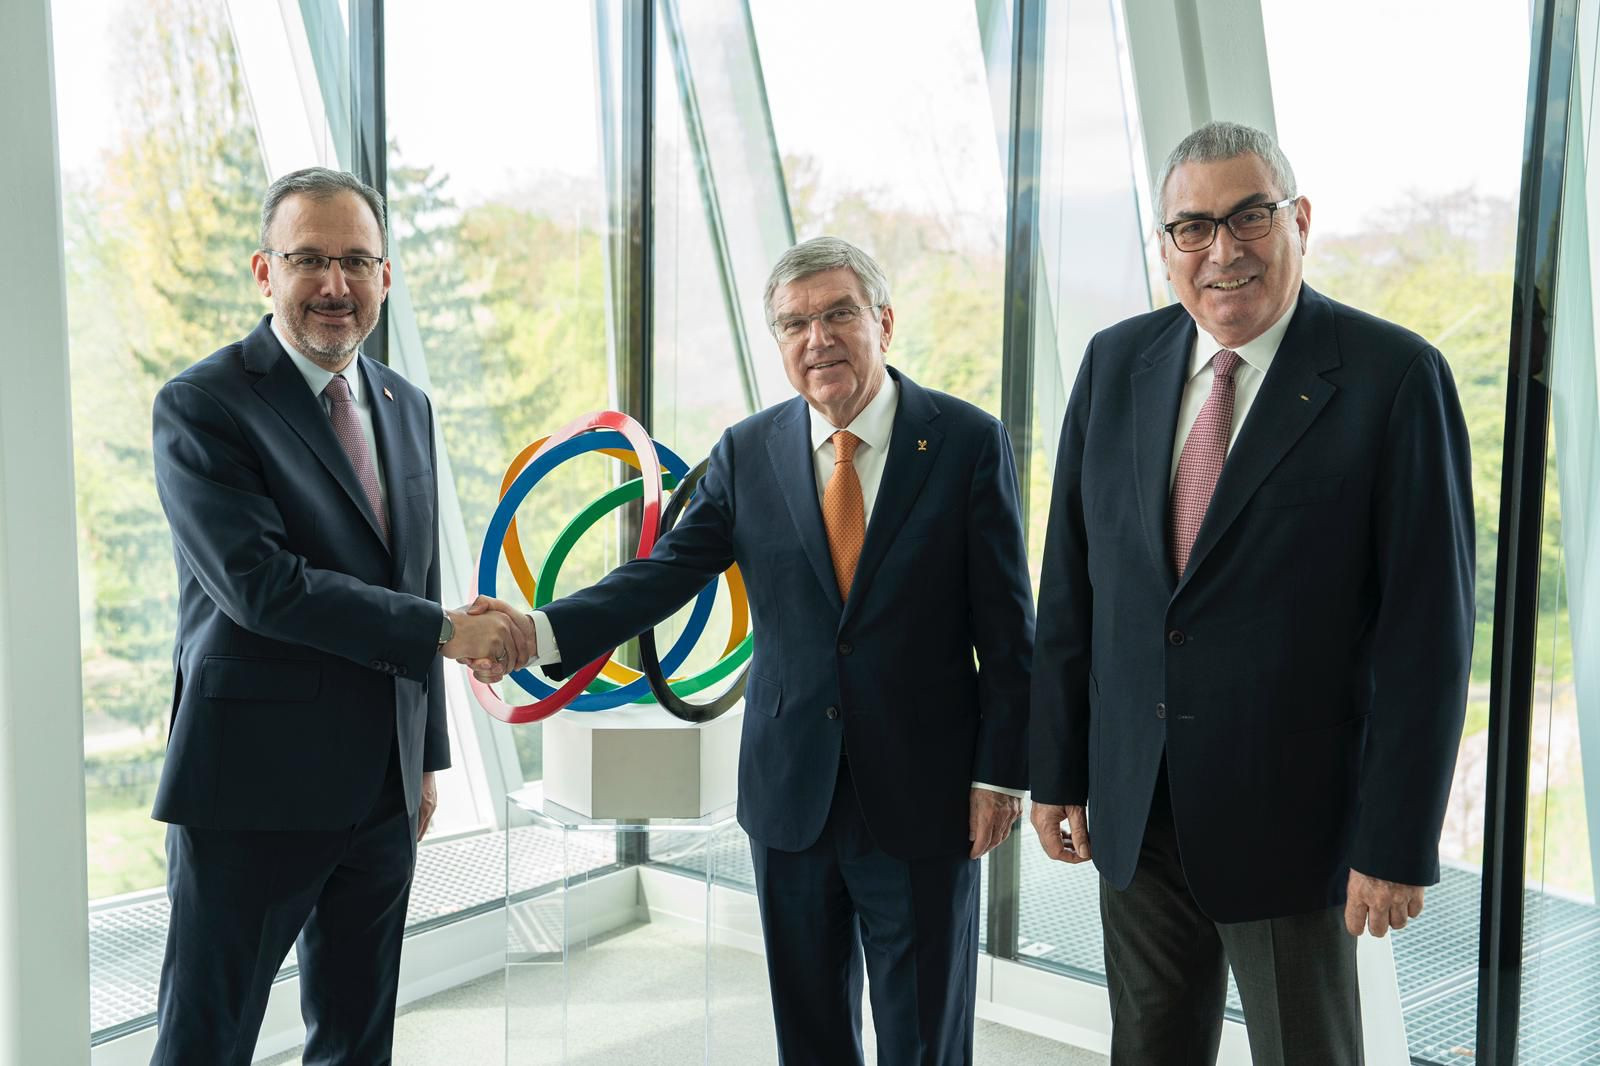 Turkish Olympic Committee and World Archery President and IOC member Uğur Erdener, right, also attended the meeting ©Turkish Ministry of Youth and Sports